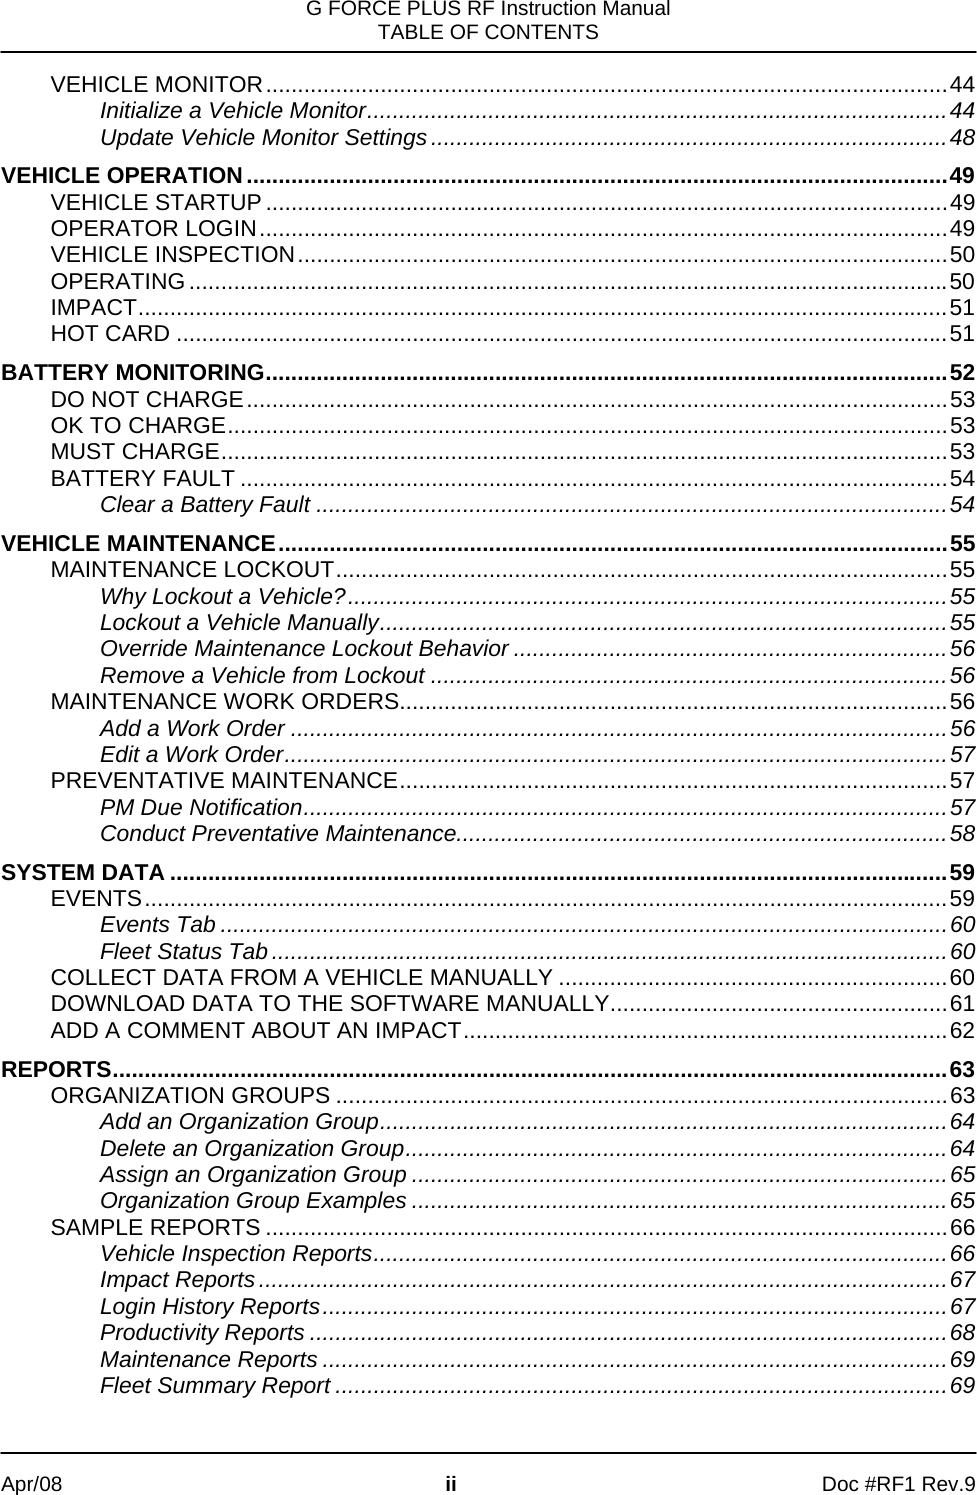 G FORCE PLUS RF Instruction Manual TABLE OF CONTENTS   Apr/08 ii Doc #RF1 Rev.9 VEHICLE MONITOR...........................................................................................................44 Initialize a Vehicle Monitor...........................................................................................44 Update Vehicle Monitor Settings.................................................................................48 VEHICLE OPERATION..............................................................................................................49 VEHICLE STARTUP ...........................................................................................................49 OPERATOR LOGIN............................................................................................................49 VEHICLE INSPECTION......................................................................................................50 OPERATING.......................................................................................................................50 IMPACT...............................................................................................................................51 HOT CARD .........................................................................................................................51 BATTERY MONITORING...........................................................................................................52 DO NOT CHARGE..............................................................................................................53 OK TO CHARGE.................................................................................................................53 MUST CHARGE..................................................................................................................53 BATTERY FAULT ...............................................................................................................54 Clear a Battery Fault ...................................................................................................54 VEHICLE MAINTENANCE.........................................................................................................55 MAINTENANCE LOCKOUT................................................................................................55 Why Lockout a Vehicle?..............................................................................................55 Lockout a Vehicle Manually.........................................................................................55 Override Maintenance Lockout Behavior ....................................................................56 Remove a Vehicle from Lockout .................................................................................56 MAINTENANCE WORK ORDERS......................................................................................56 Add a Work Order .......................................................................................................56 Edit a Work Order........................................................................................................57 PREVENTATIVE MAINTENANCE......................................................................................57 PM Due Notification.....................................................................................................57 Conduct Preventative Maintenance.............................................................................58 SYSTEM DATA ..........................................................................................................................59 EVENTS..............................................................................................................................59 Events Tab ..................................................................................................................60 Fleet Status Tab..........................................................................................................60 COLLECT DATA FROM A VEHICLE MANUALLY .............................................................60 DOWNLOAD DATA TO THE SOFTWARE MANUALLY.....................................................61 ADD A COMMENT ABOUT AN IMPACT............................................................................62 REPORTS...................................................................................................................................63 ORGANIZATION GROUPS ................................................................................................63 Add an Organization Group.........................................................................................64 Delete an Organization Group.....................................................................................64 Assign an Organization Group ....................................................................................65 Organization Group Examples ....................................................................................65 SAMPLE REPORTS ...........................................................................................................66 Vehicle Inspection Reports..........................................................................................66 Impact Reports............................................................................................................67 Login History Reports..................................................................................................67 Productivity Reports ....................................................................................................68 Maintenance Reports ..................................................................................................69 Fleet Summary Report ................................................................................................69 